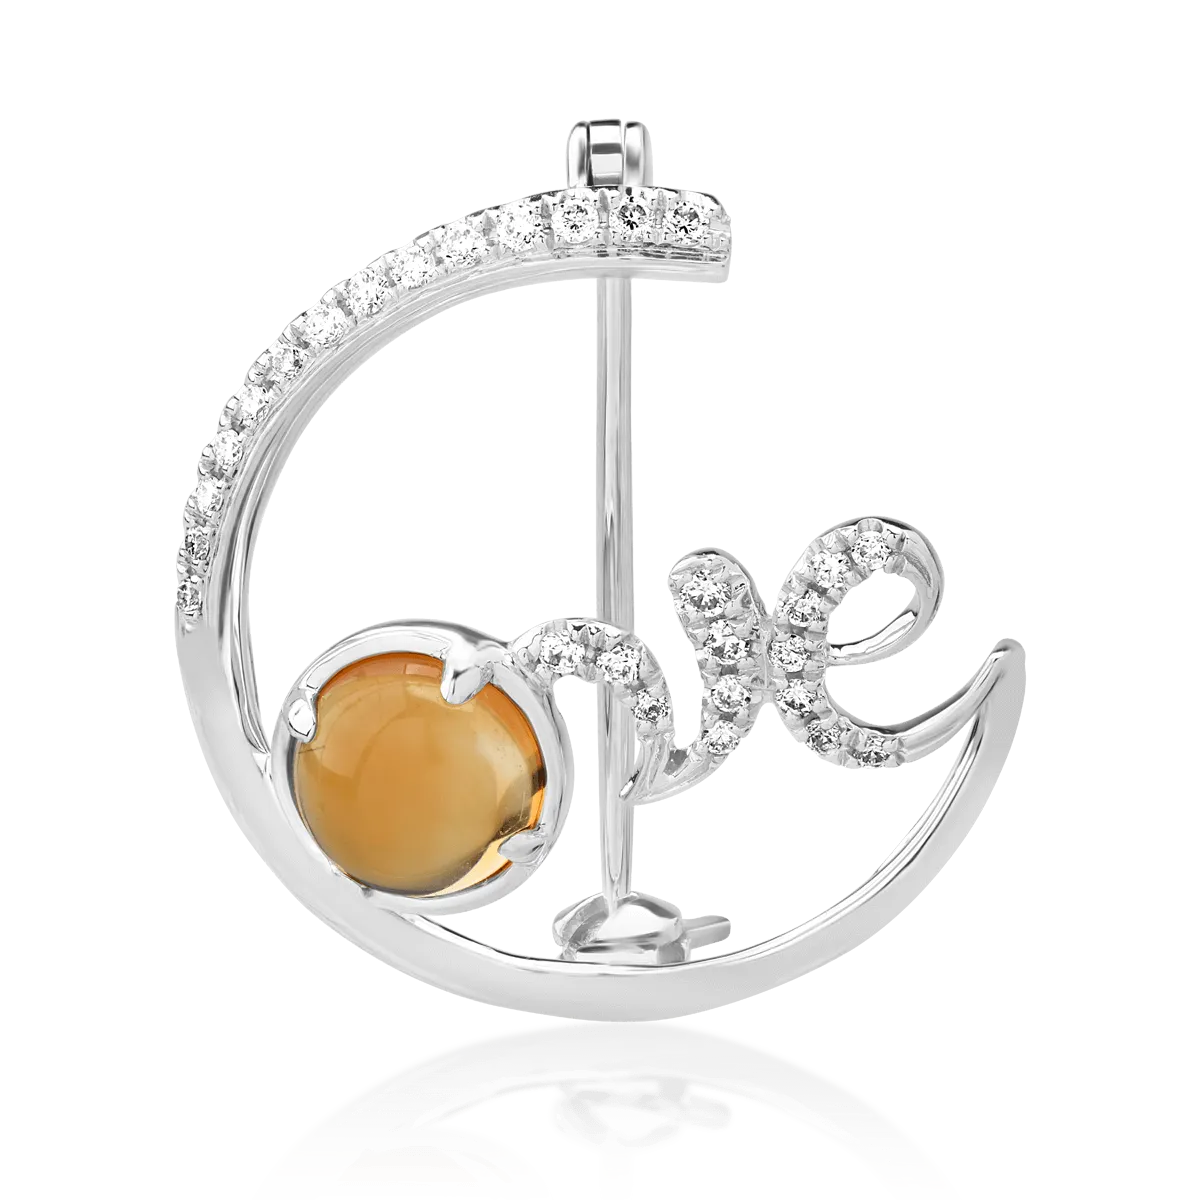 18K white gold brooch with 0.89ct citrine and 0.14ct diamonds